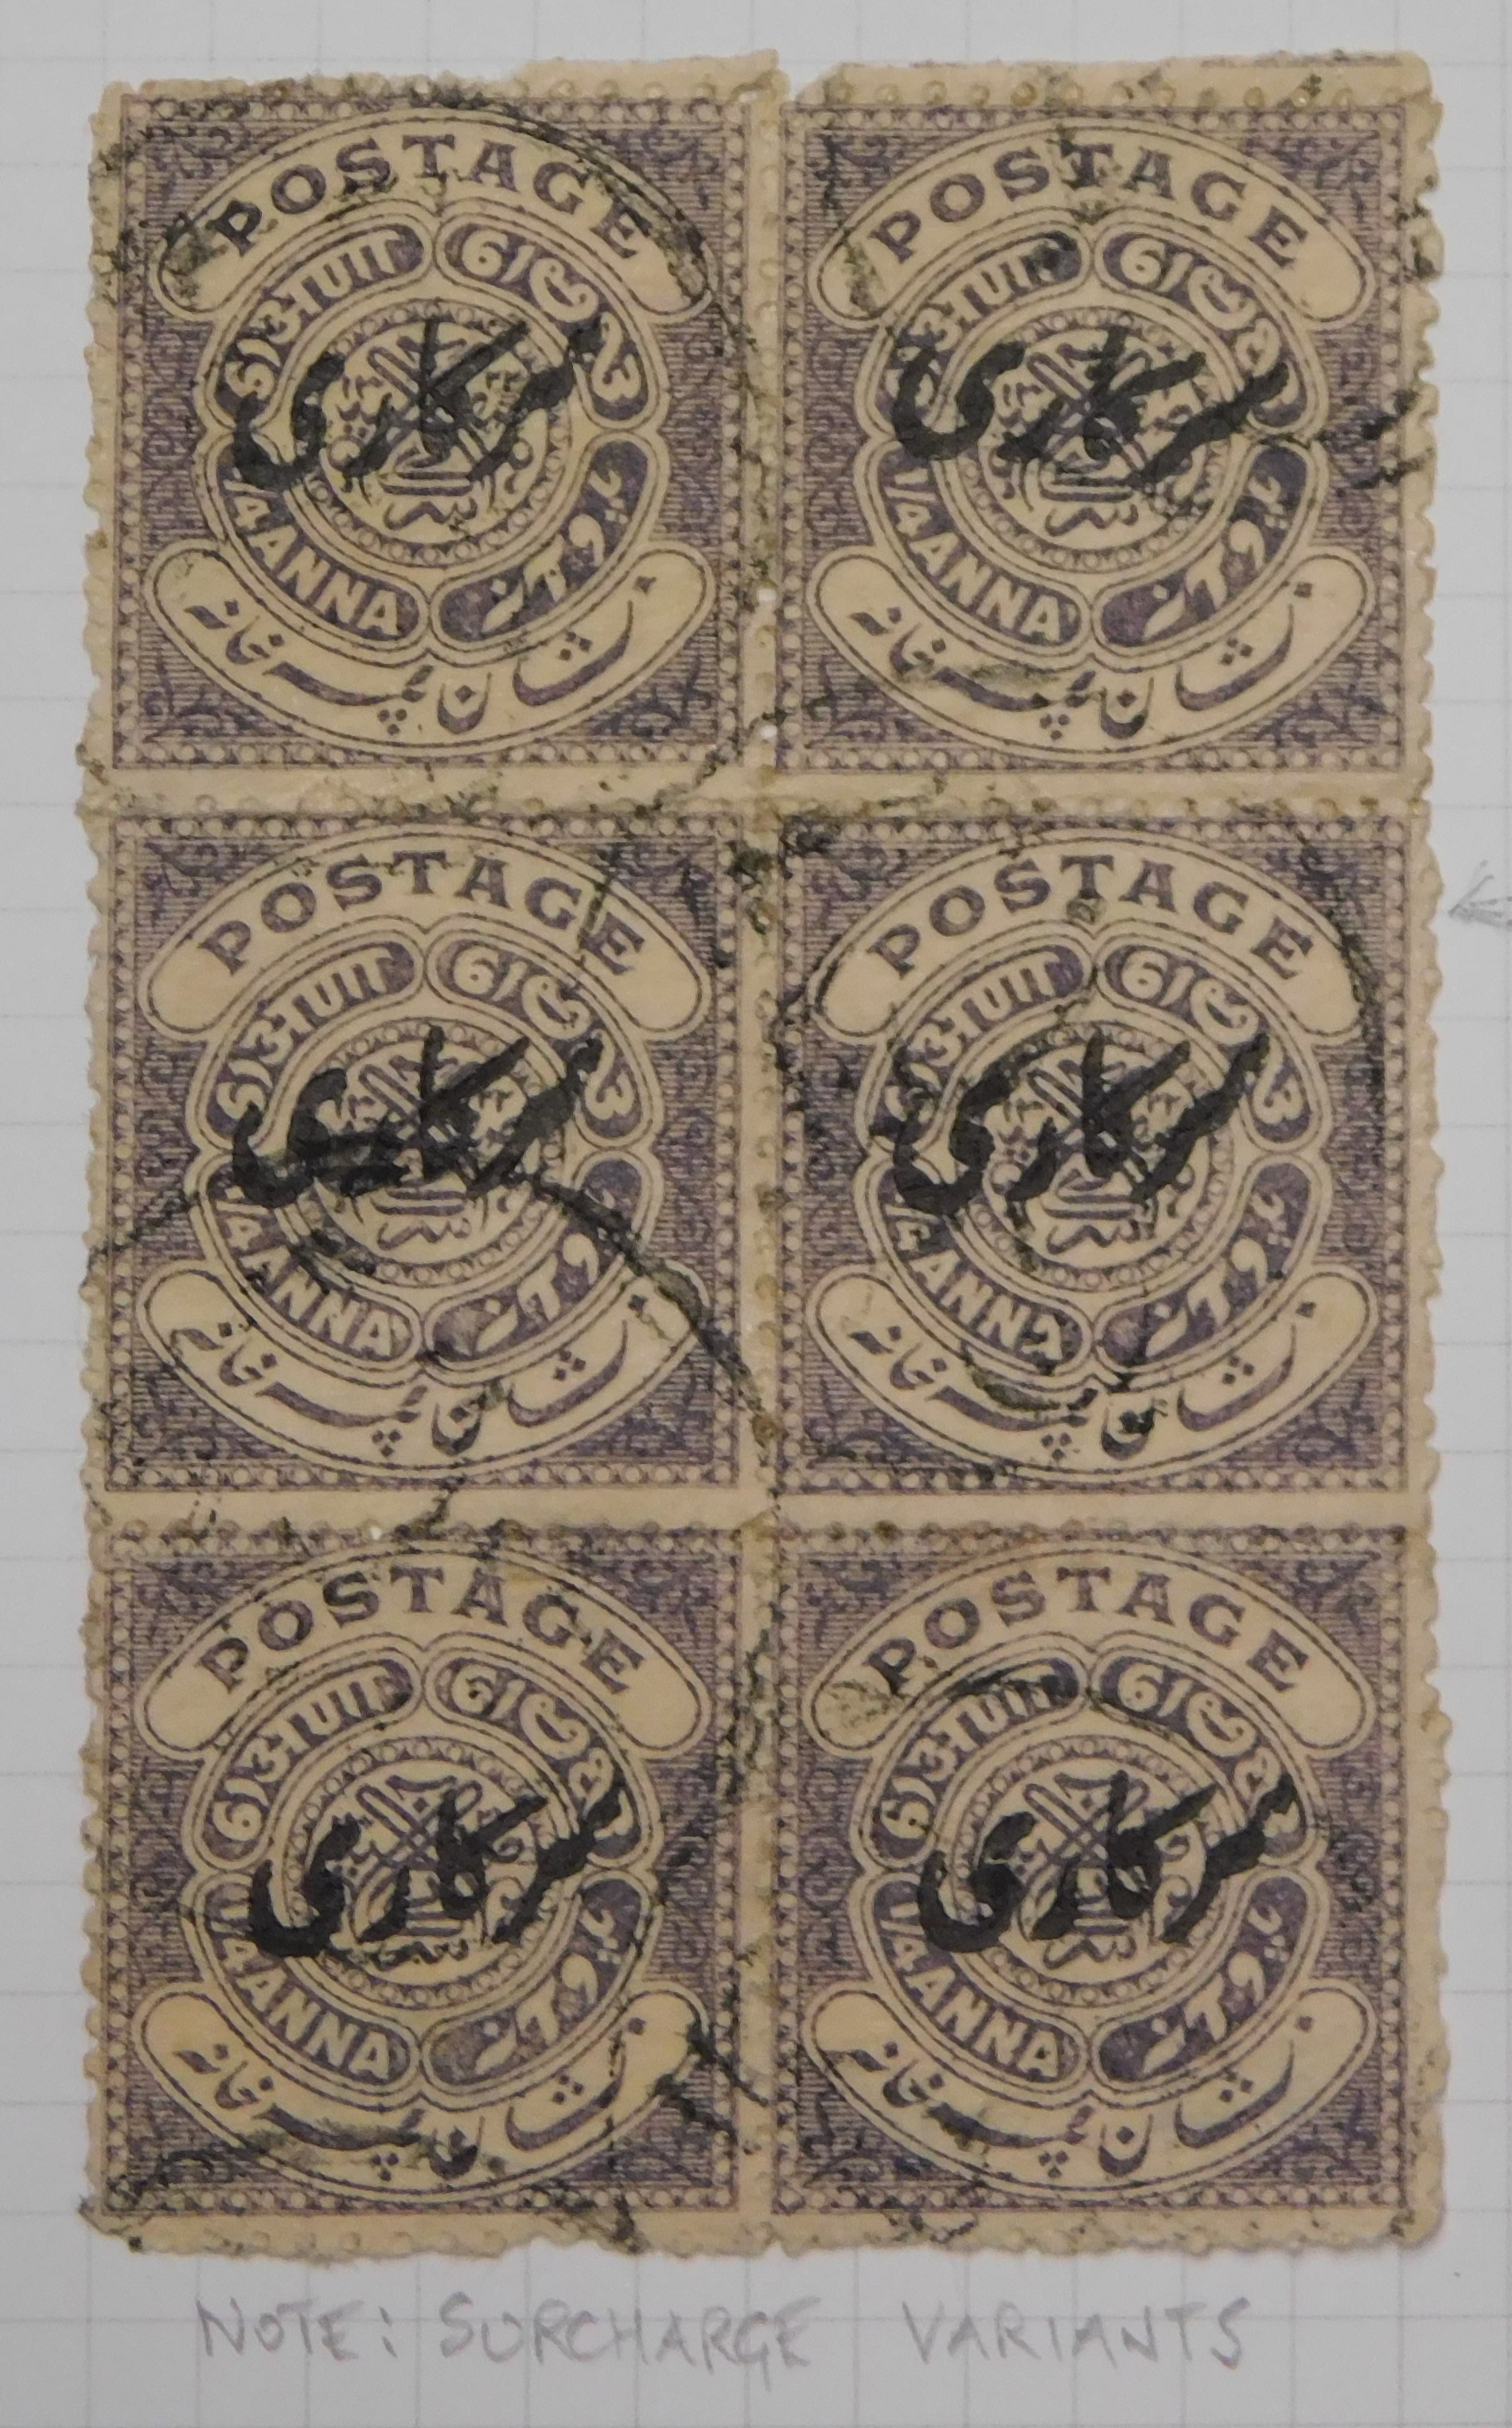 India (Hyderabad) Officials very fine used 1911-1912 035 to 039c, 038 P12.1/2 (Not catalogues) al 20 - Image 7 of 7